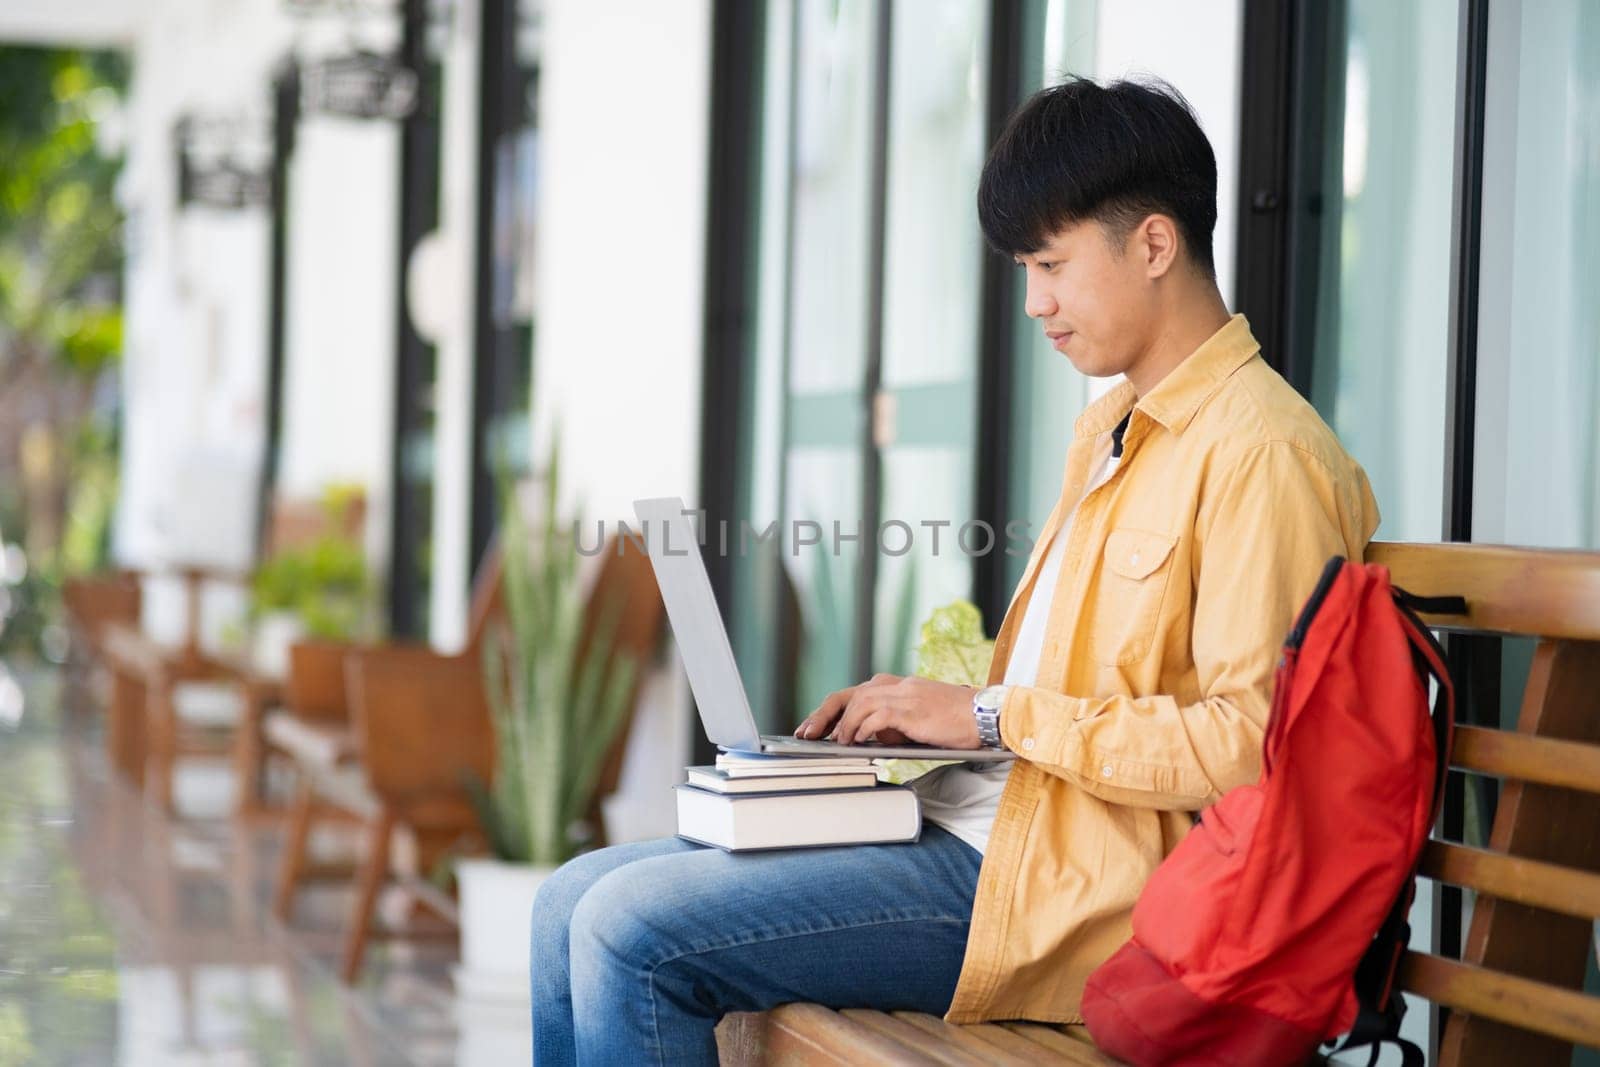 A college student sits on an outdoor bench, working intently on his laptop, with a stack of books and a red backpack by his side.